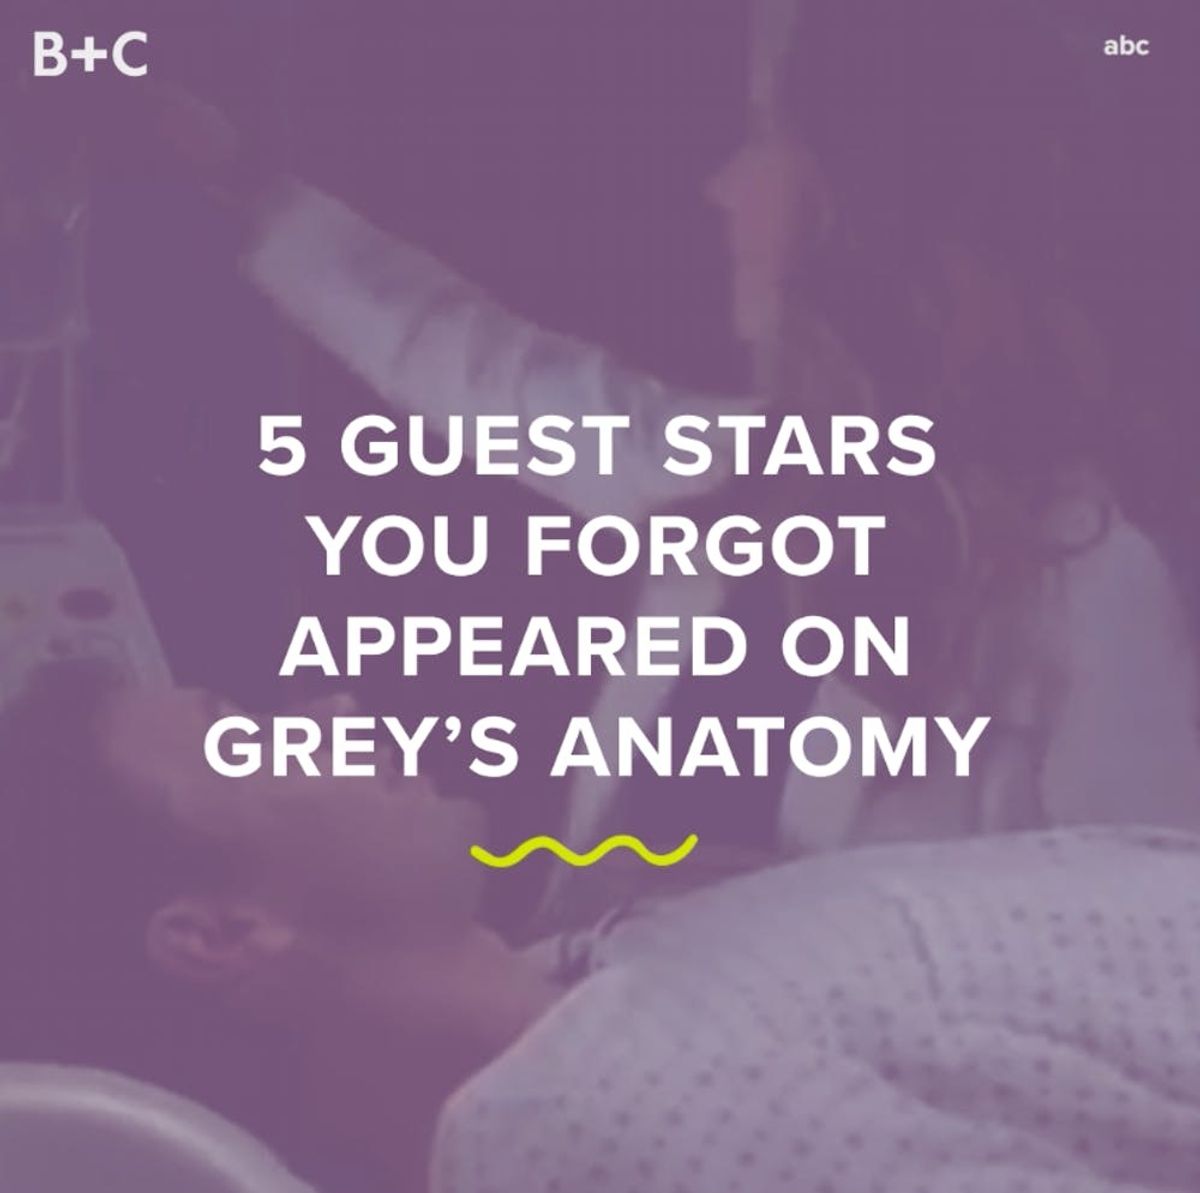 Grey’s Anatomy Guest Stars We Totally Forgot About